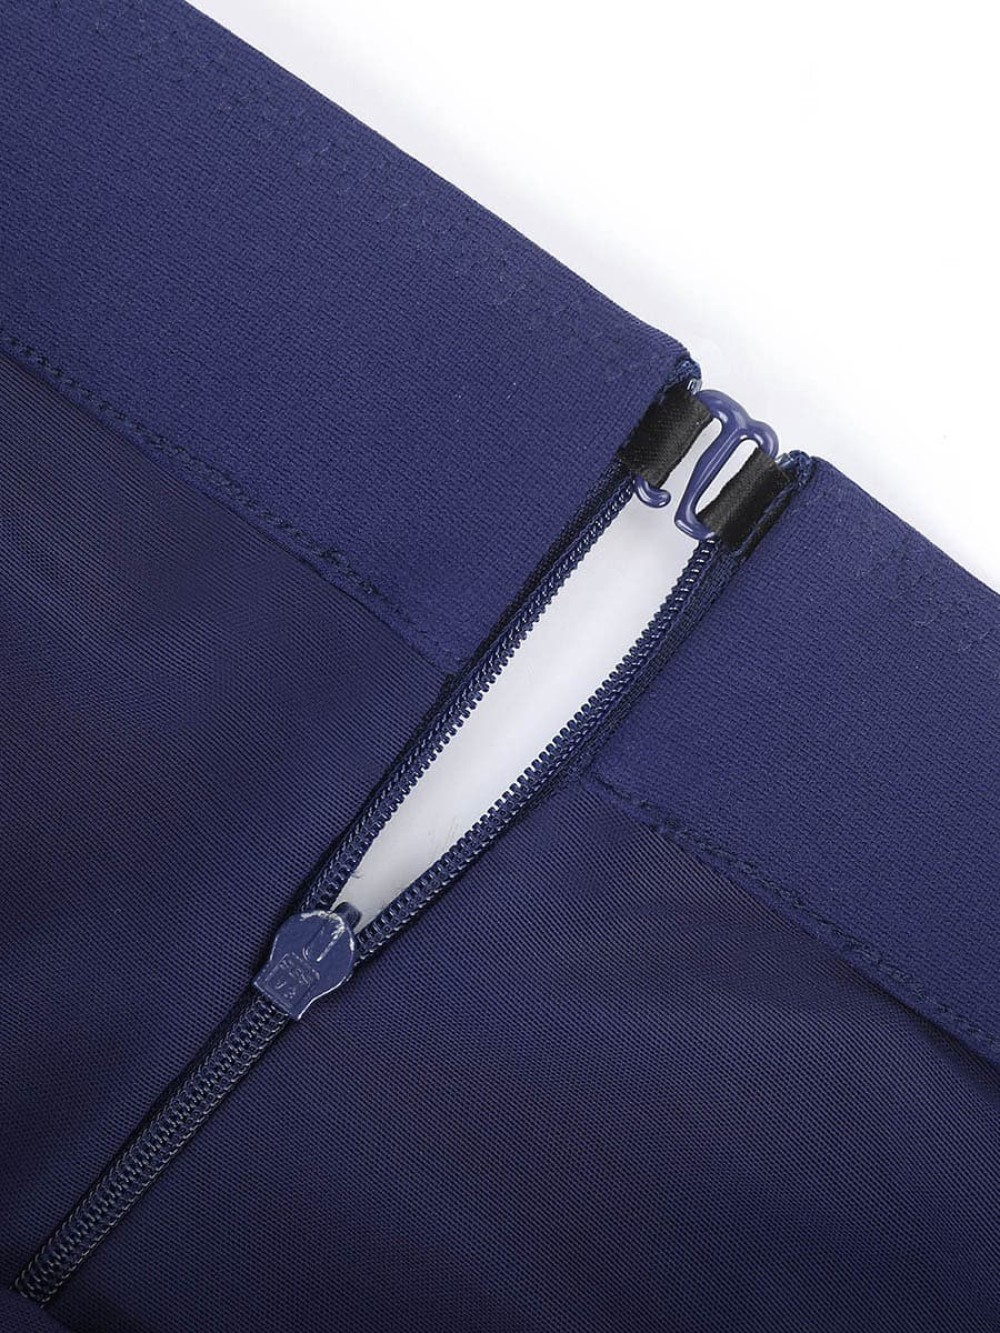 Waist Trimming Straight-leg pants with Built-in Shaping Shorts